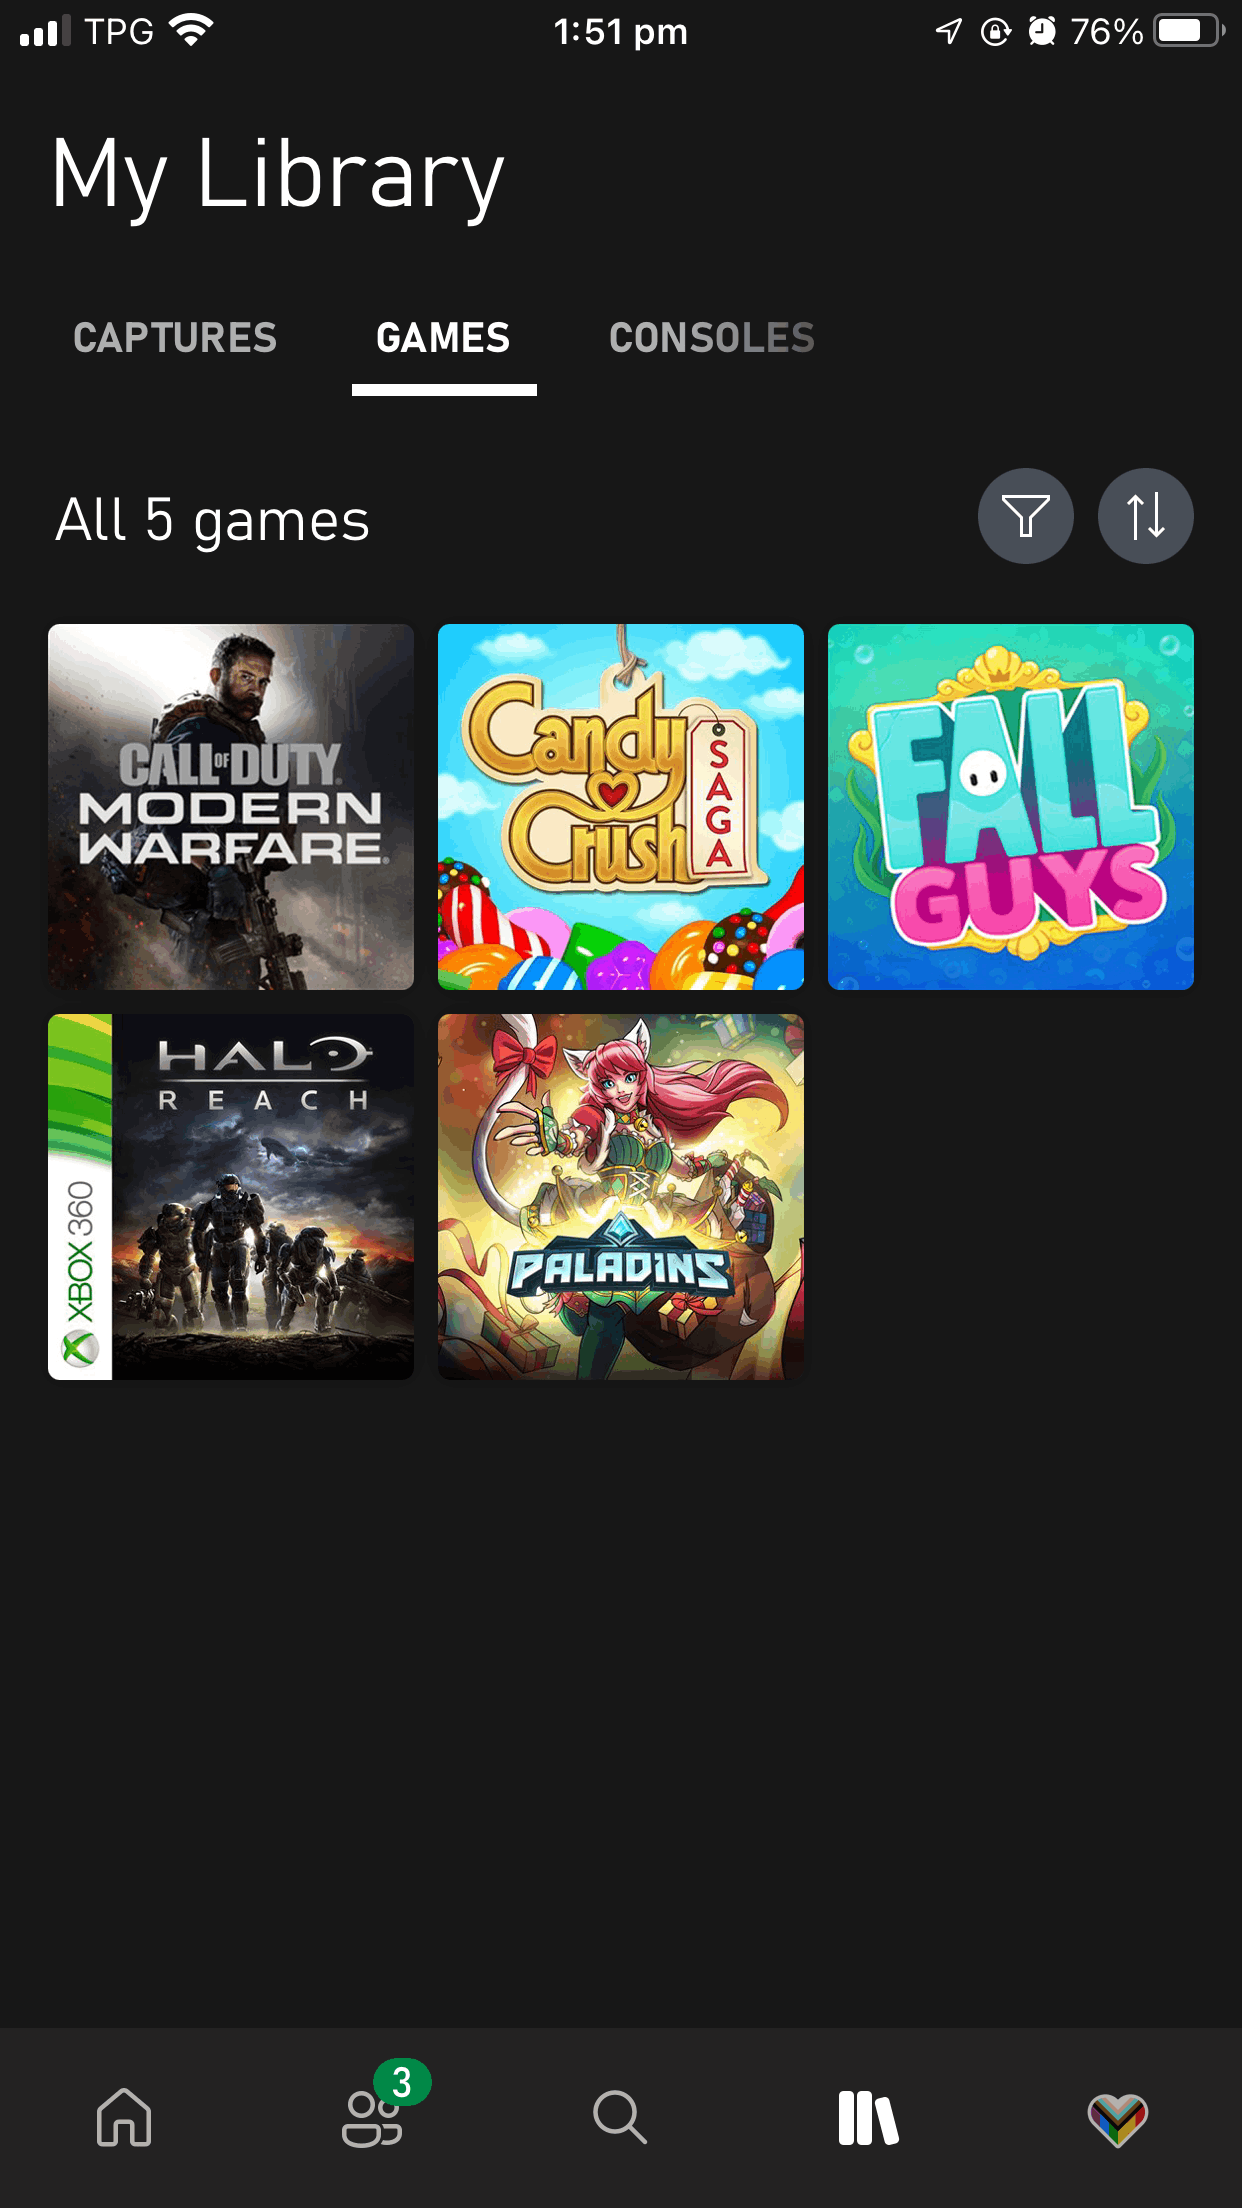 Why is candy crush showing up in my Xbox Library, when I've never